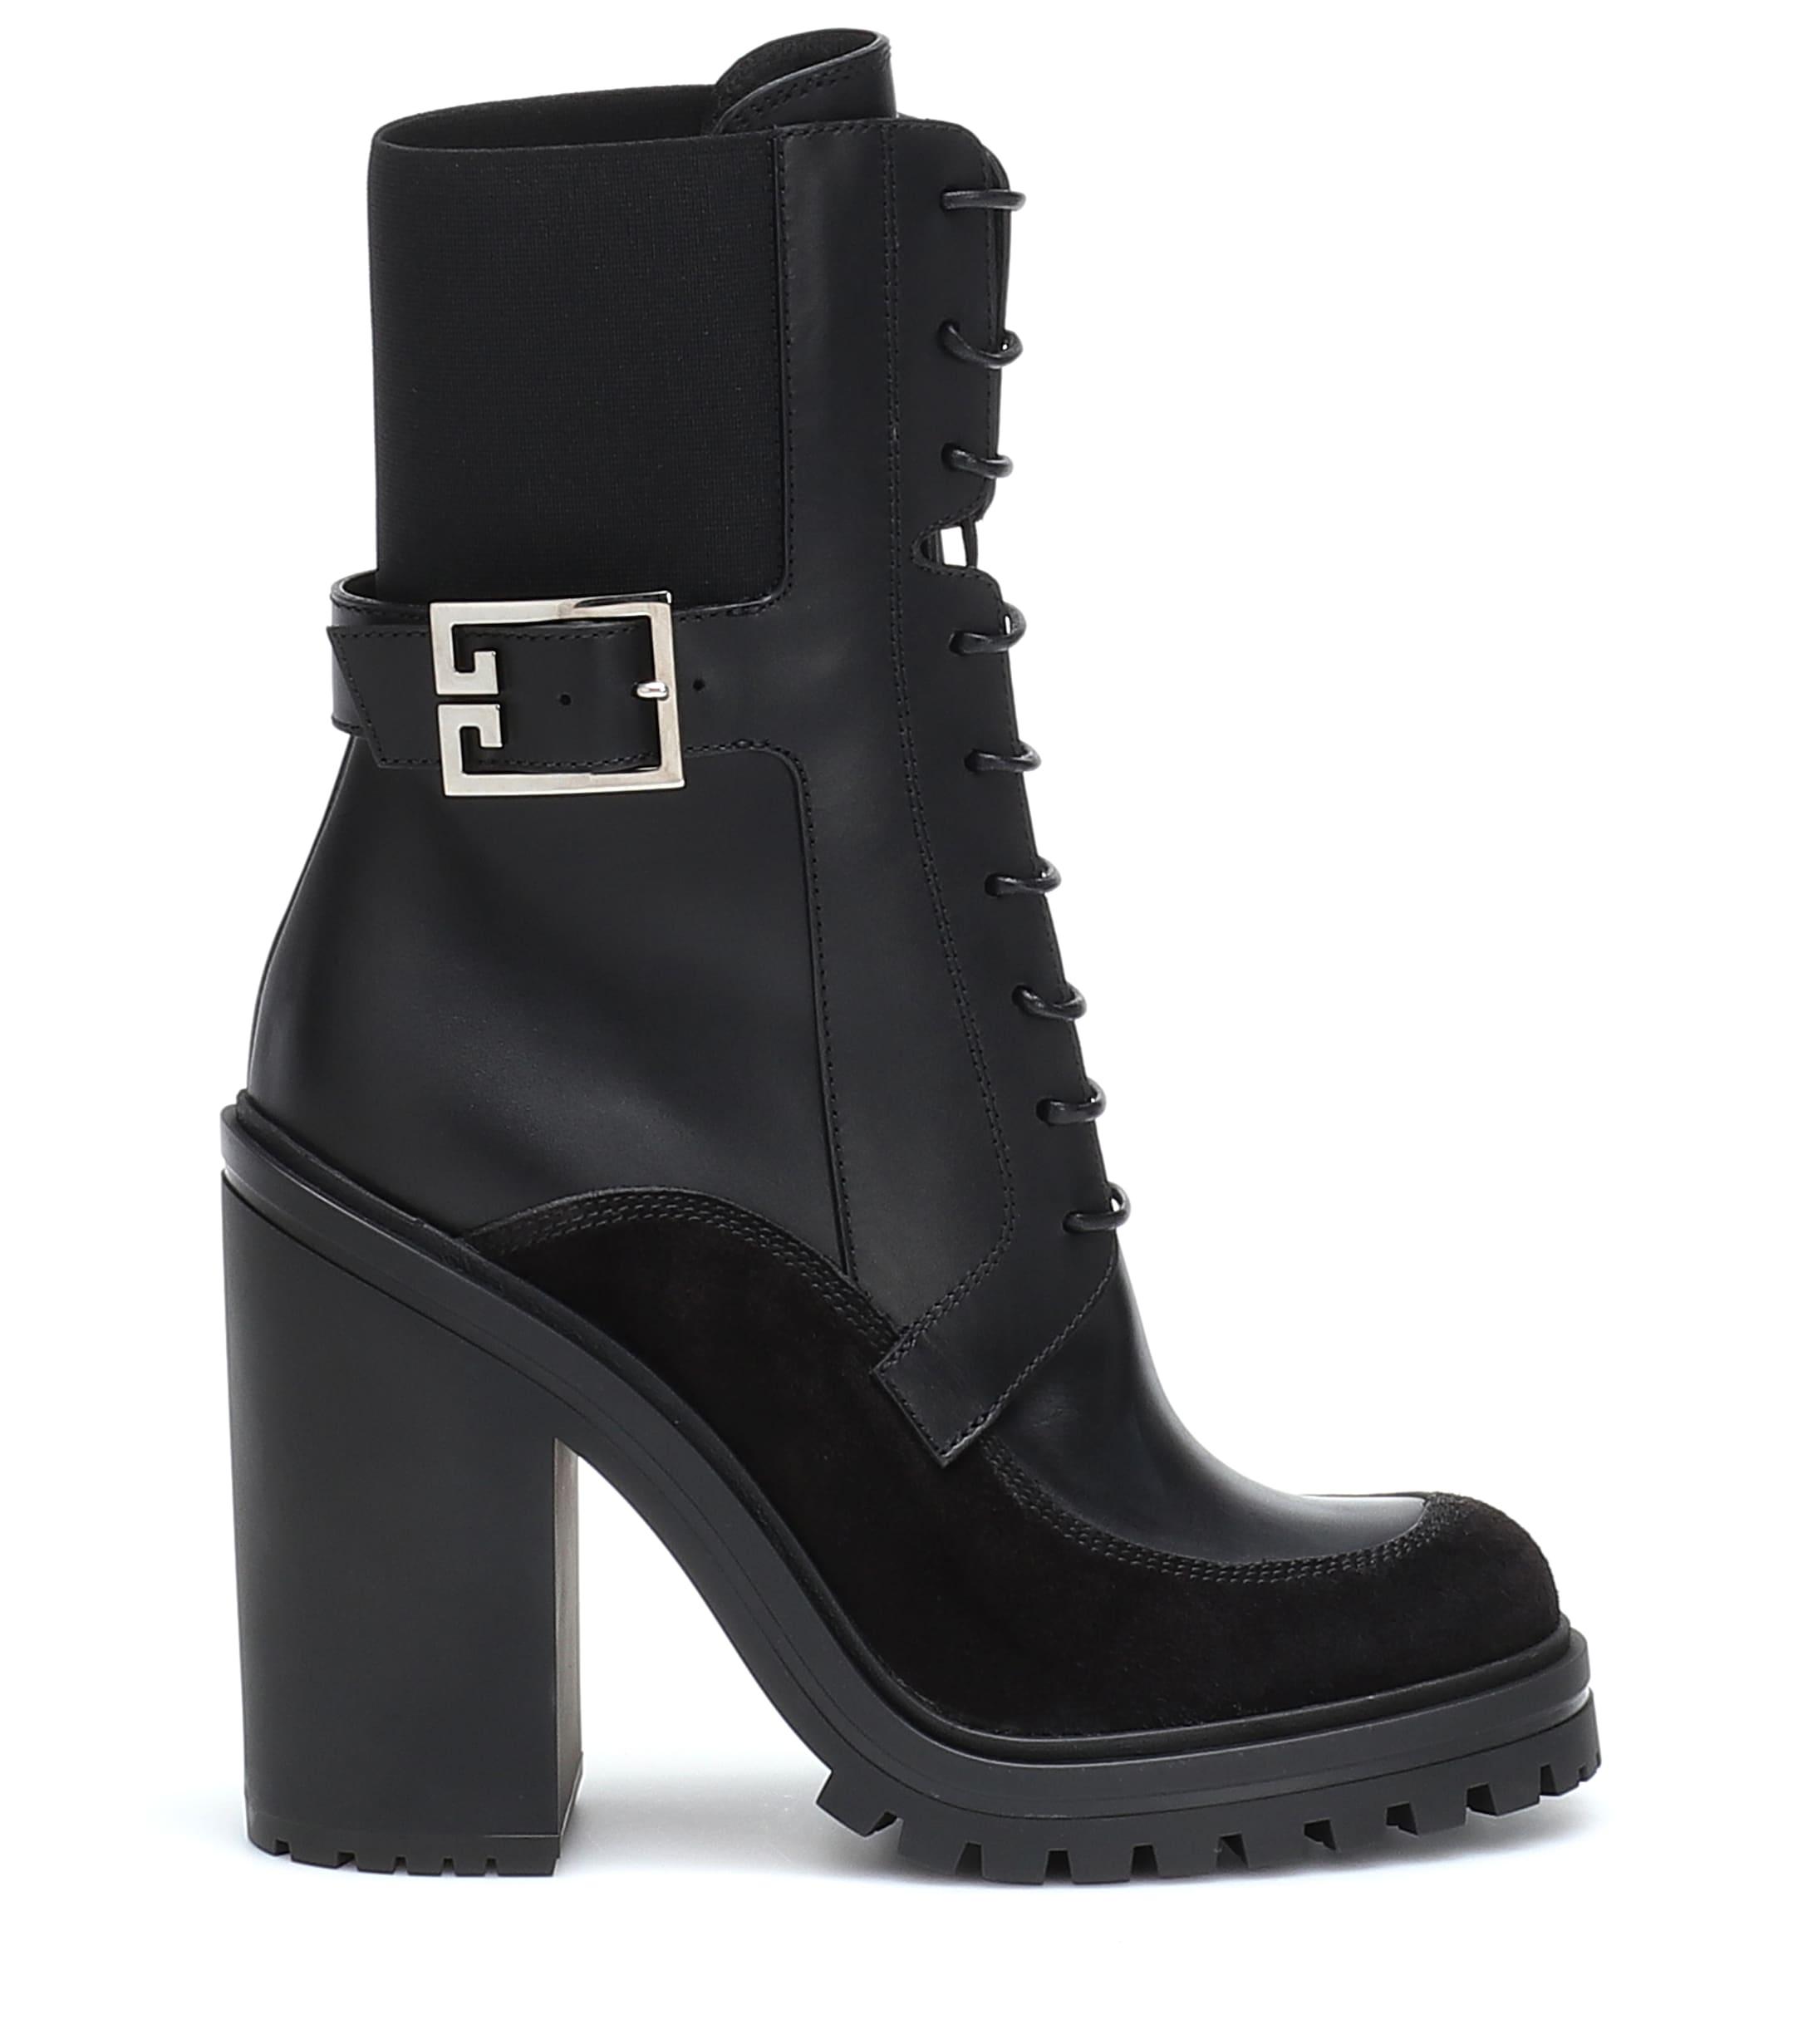 Givenchy Aviator Leather Ankle Boots in Black - Lyst